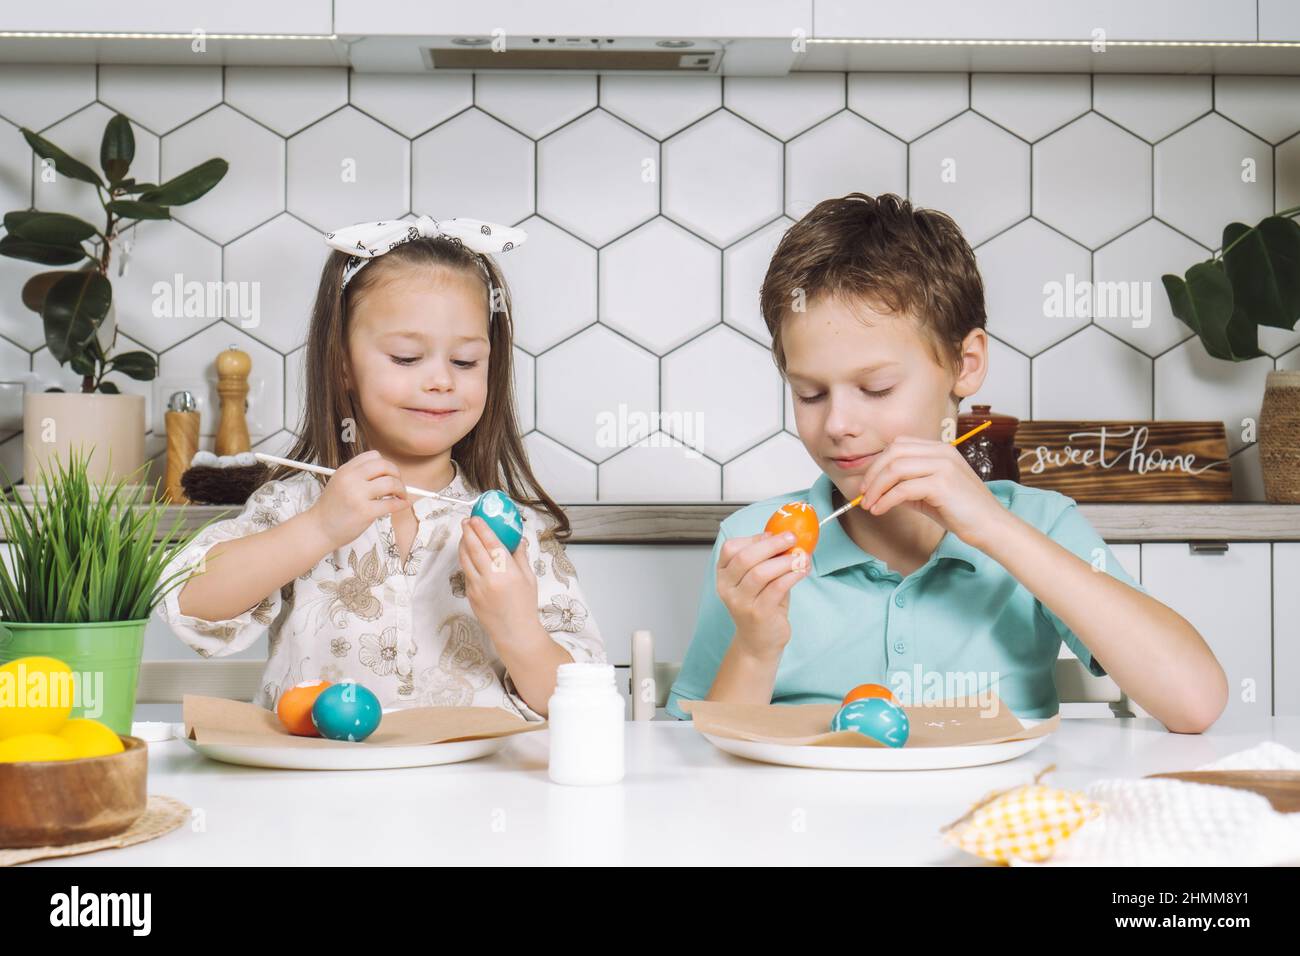 Portrait of concentrated smiling two kids, little girl and boy, coloring patterns on Easter hens eggs on paper table with paintbrushes near plant. Mak Stock Photo